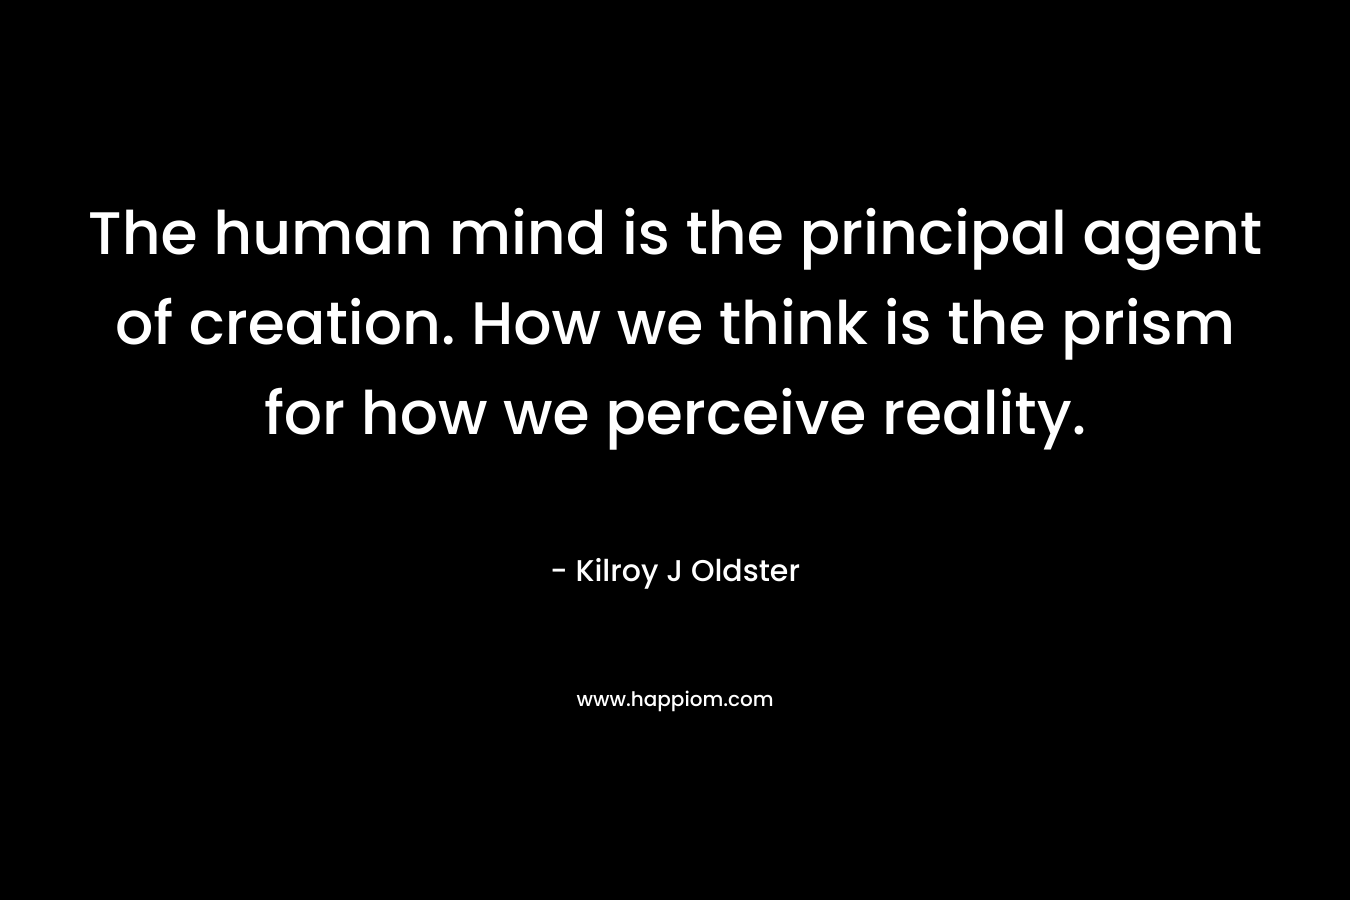 The human mind is the principal agent of creation. How we think is the prism for how we perceive reality.